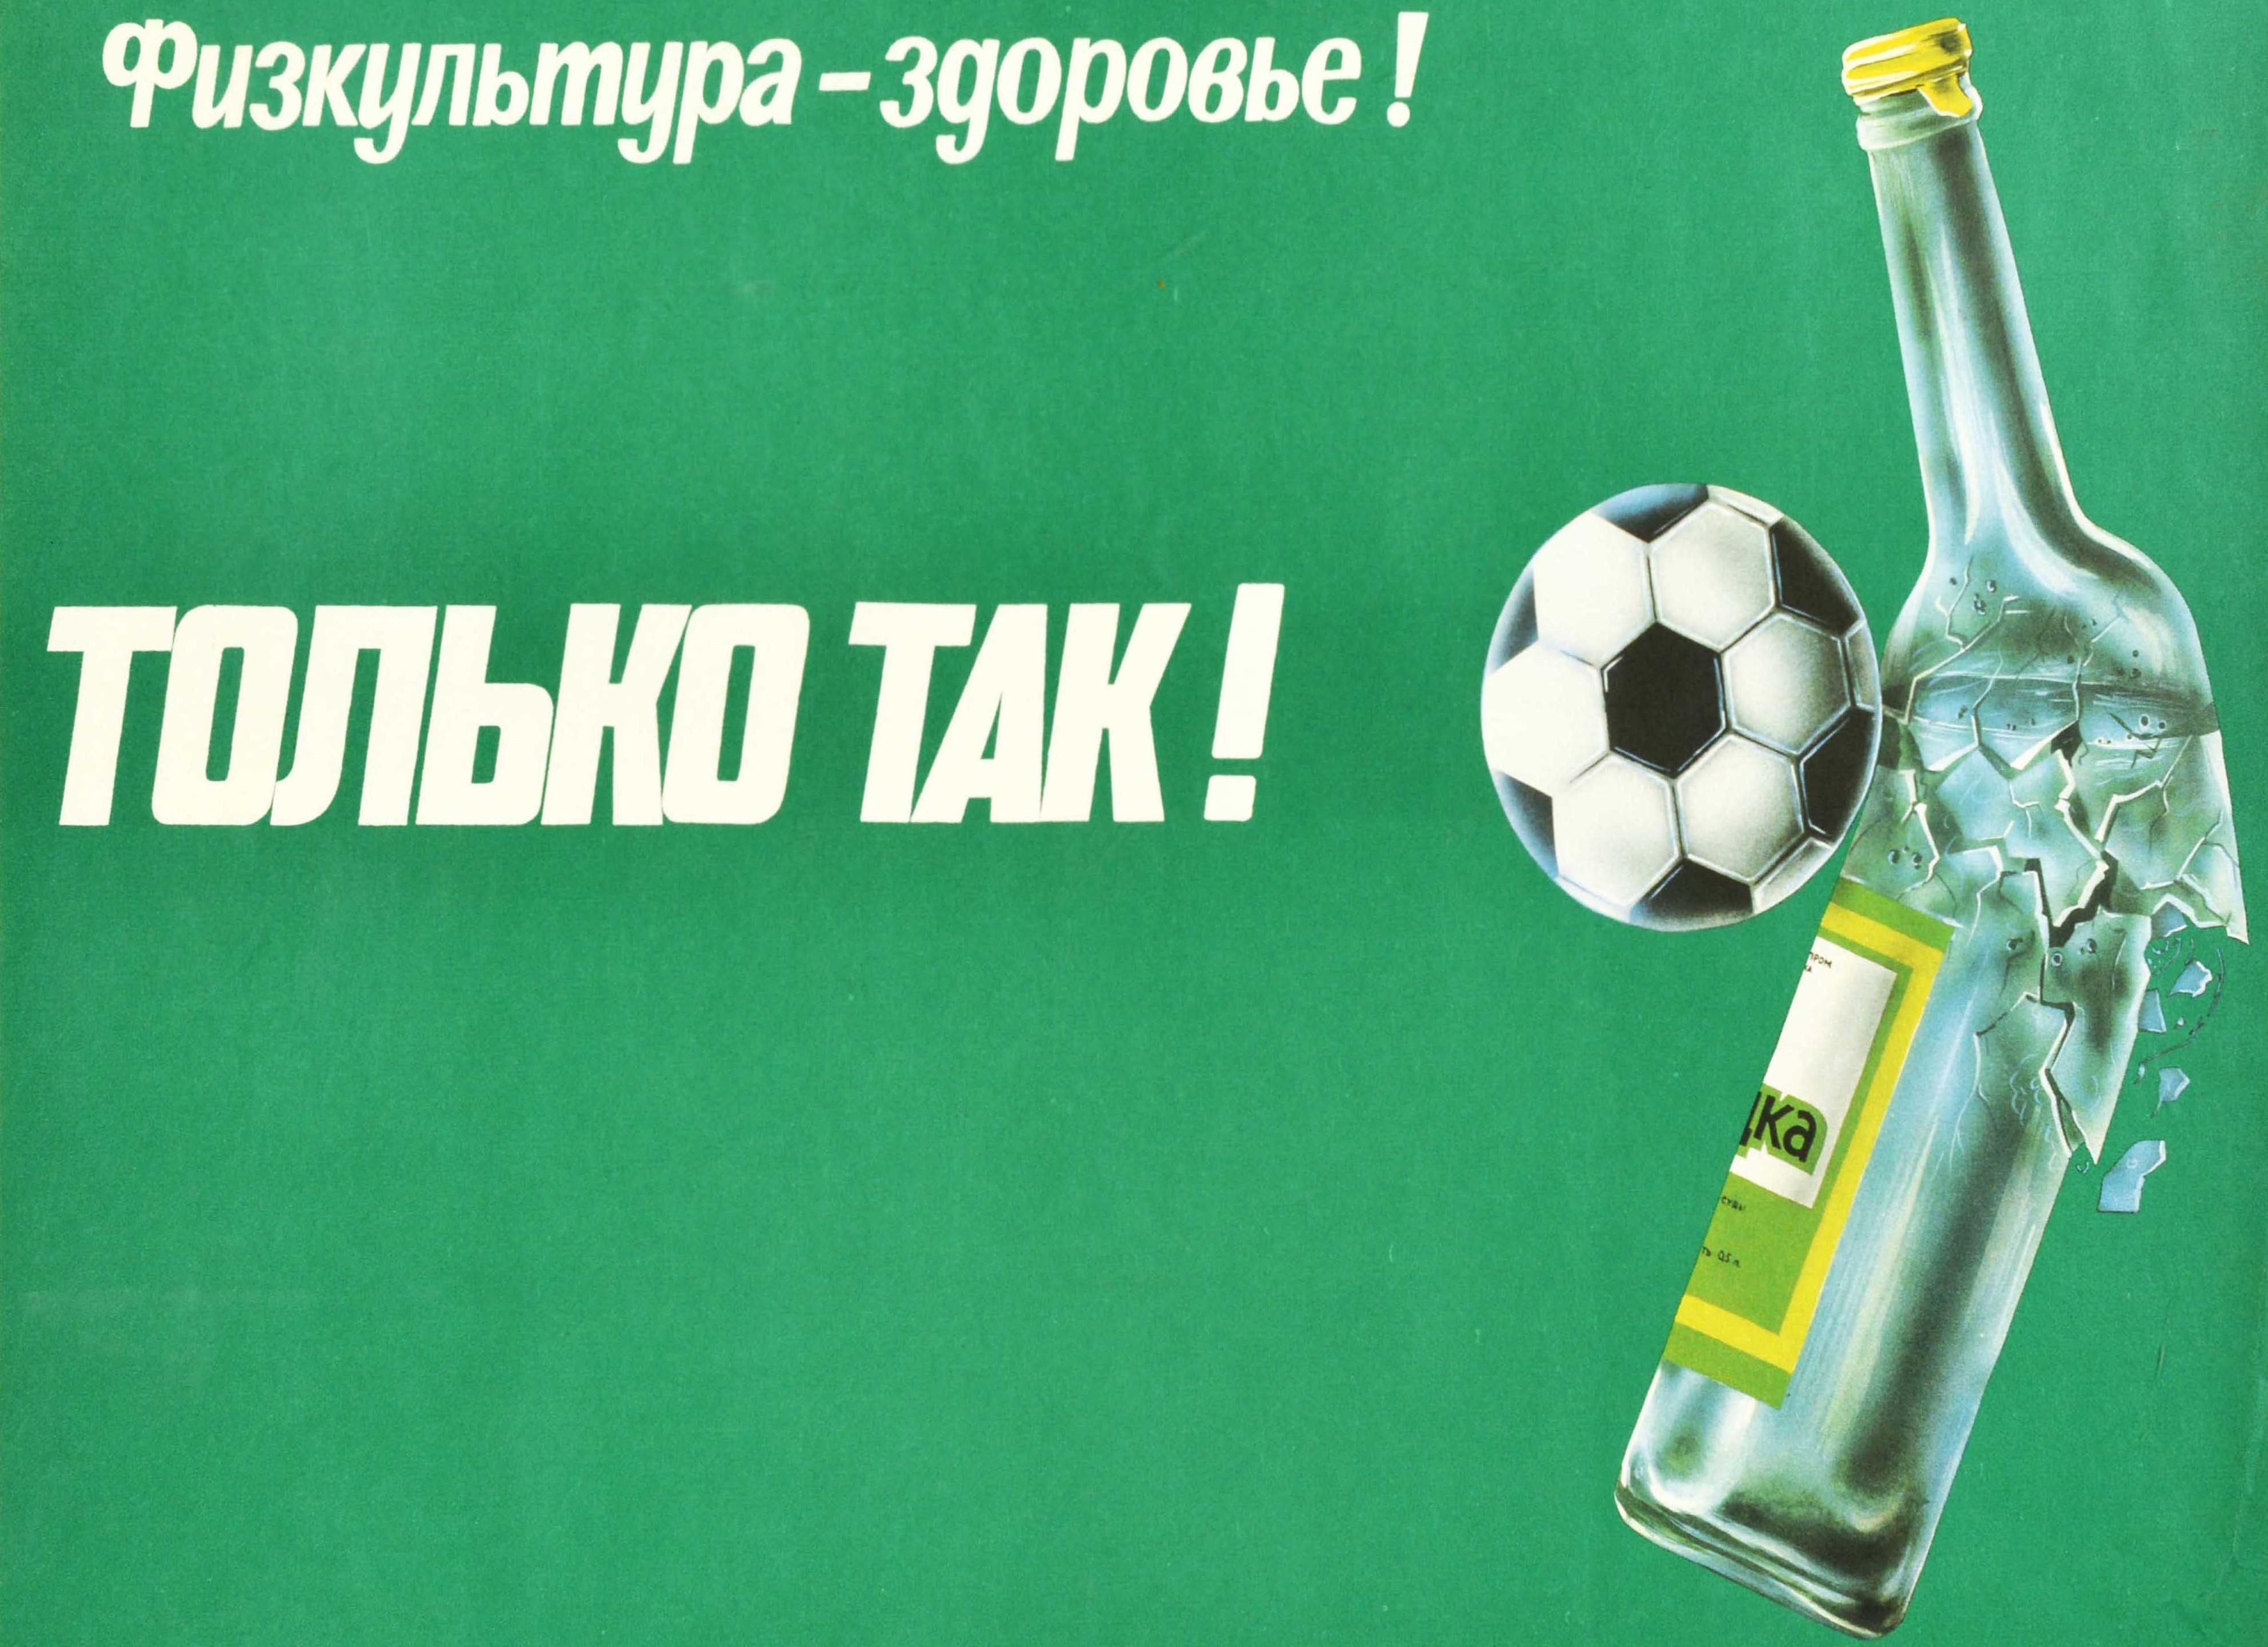 Original vintage Soviet propaganda poster - Physical education is health! The only way! / ??????????? ????????! ?????? ???! Great design depicting a football smashing a bottle of vodka against the green background, to encourage sport instead of